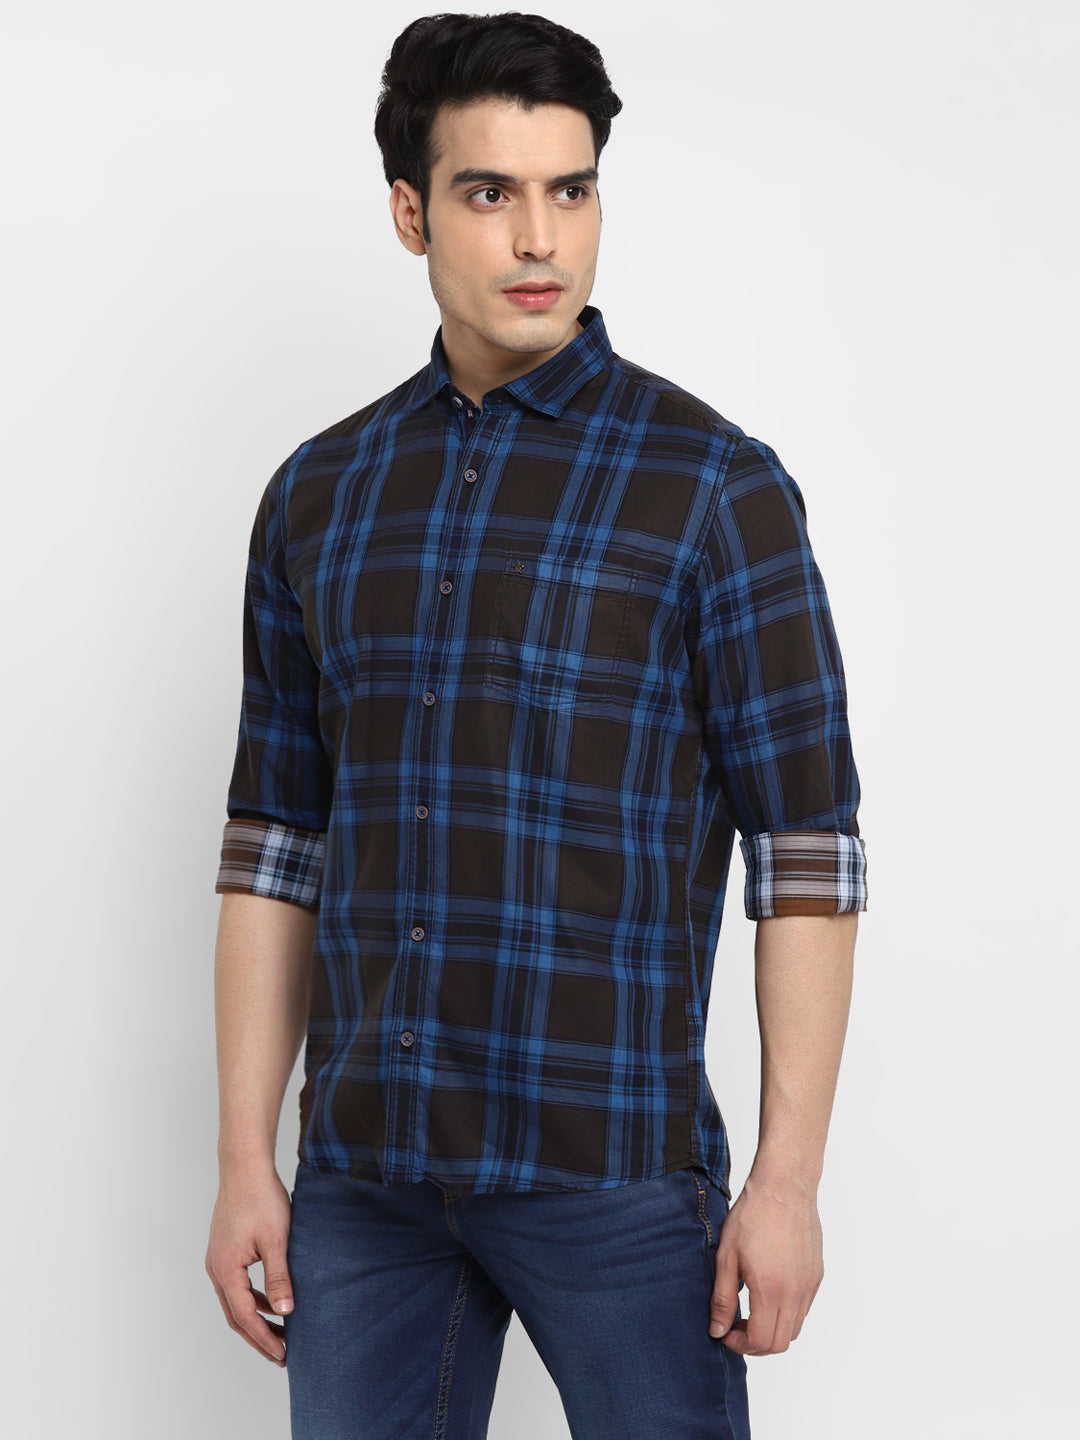 Checked Blue & Black Slim Fit Casual Shirt For Men